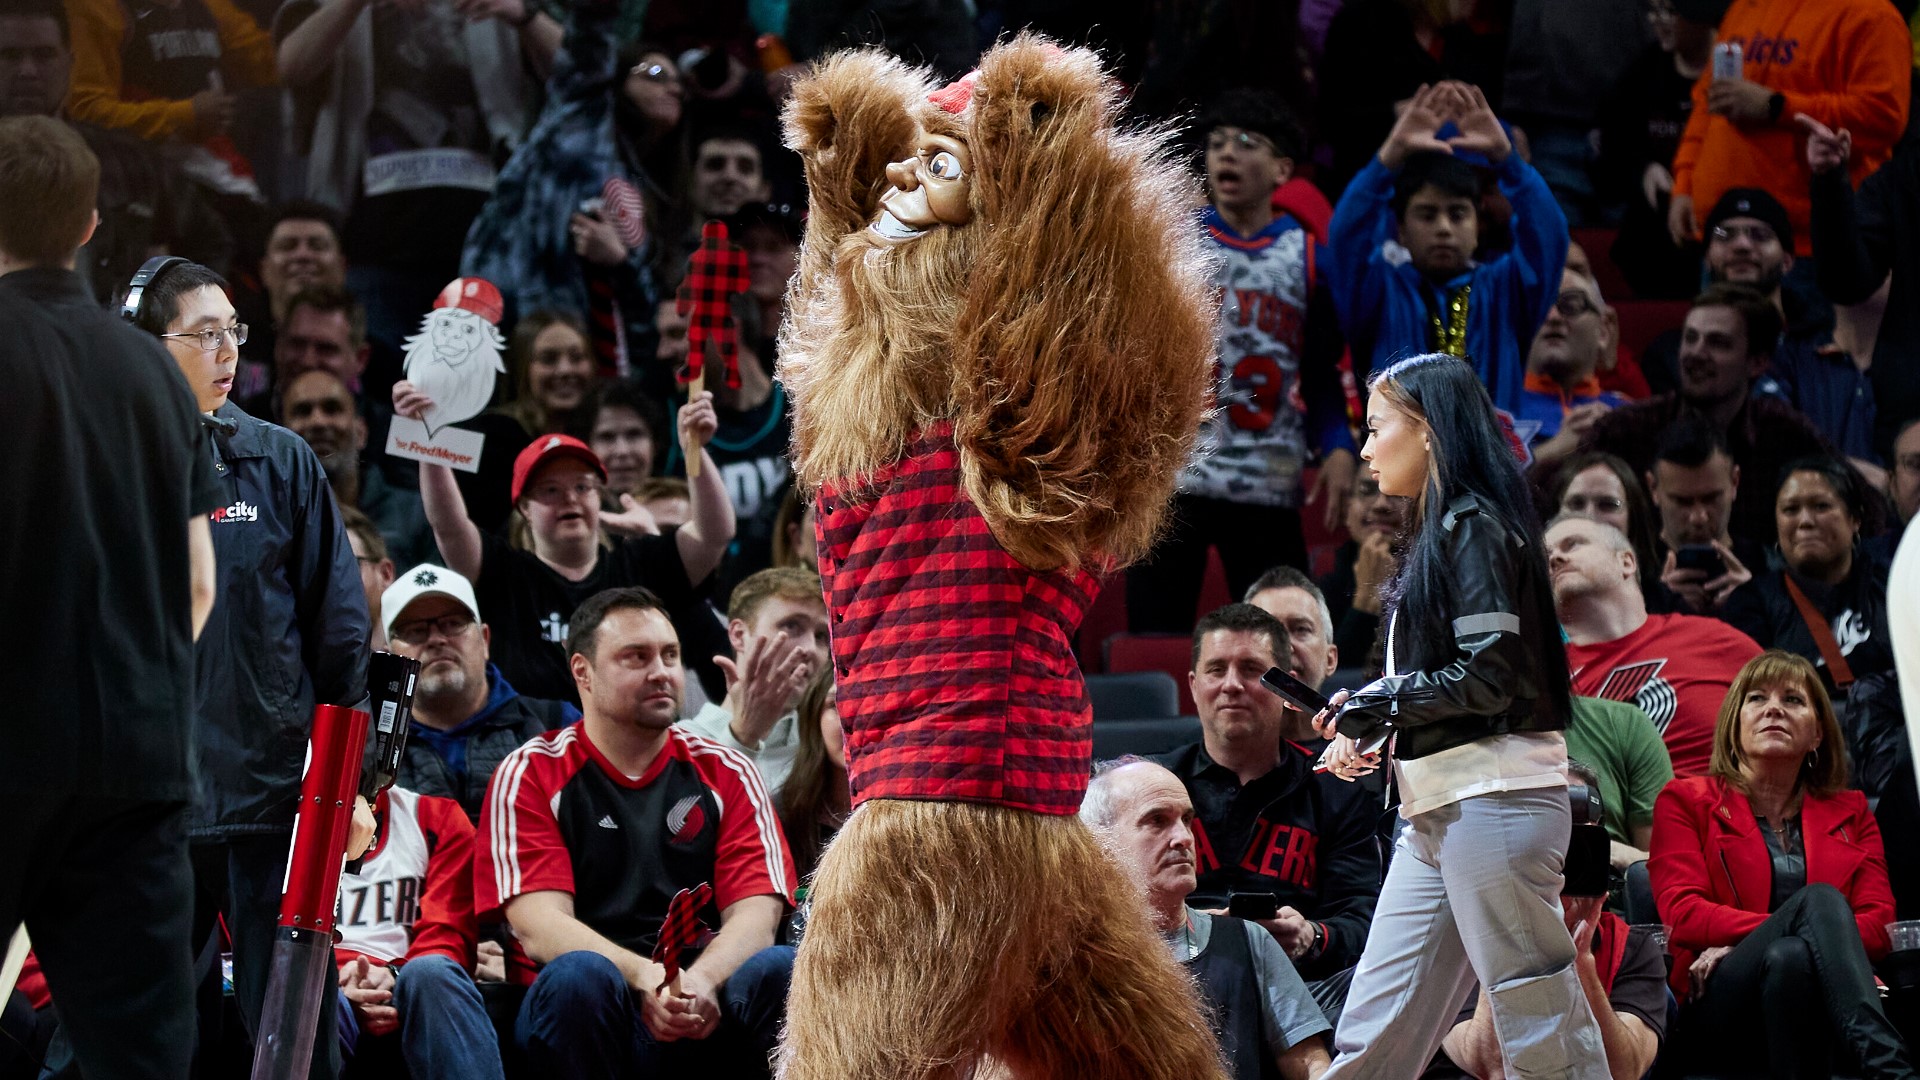 'Douglas Fur' will be joining current mascot, Blaze the Trail Cat, to help cheer on the Blazers going forward.